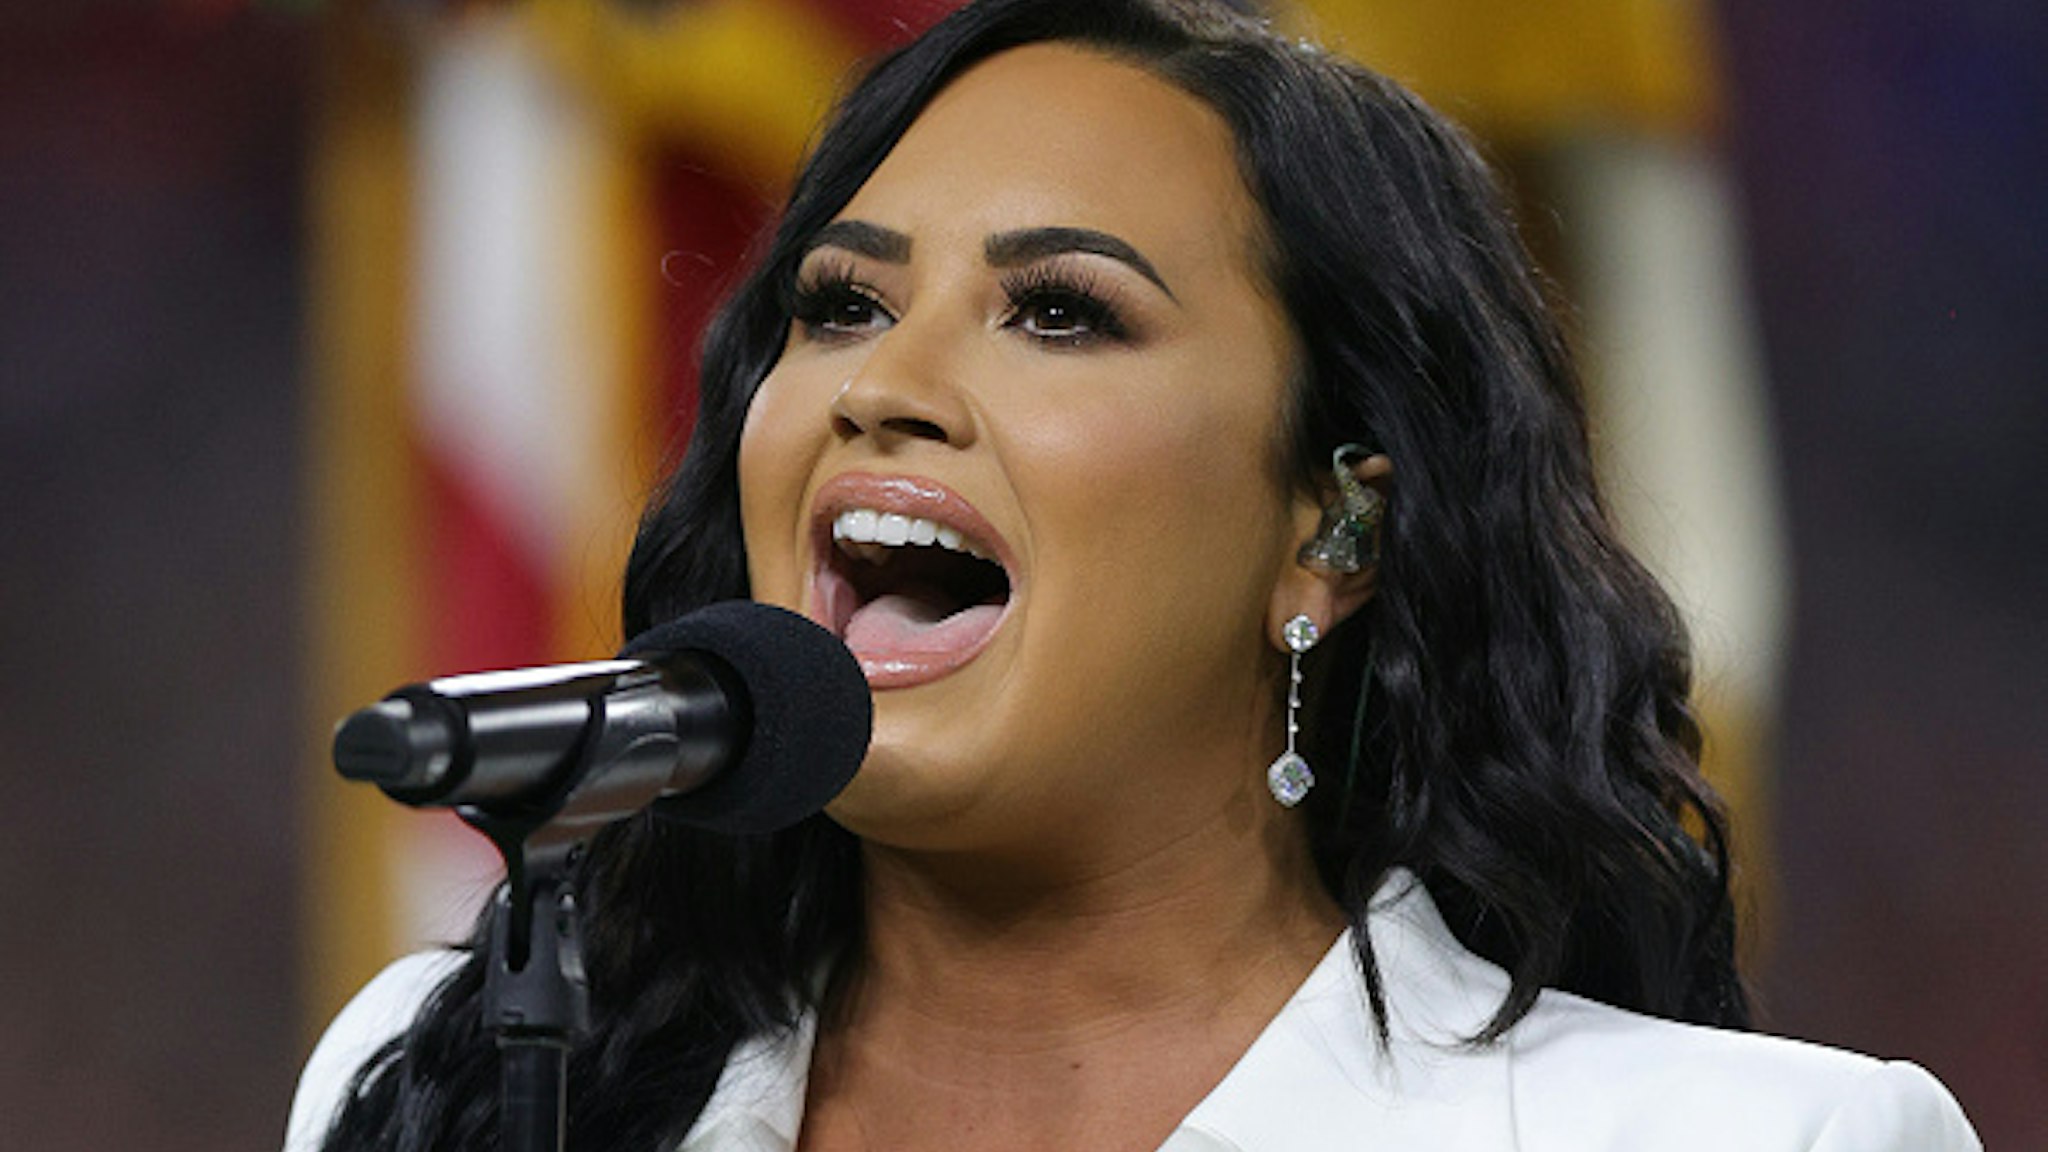 MIAMI, FLORIDA - FEBRUARY 02: Singer Demi Lovato performs the national anthem prior to Super Bowl LIV between the San Francisco 49ers and the Kansas City Chiefs at Hard Rock Stadium on February 02, 2020 in Miami, Florida.